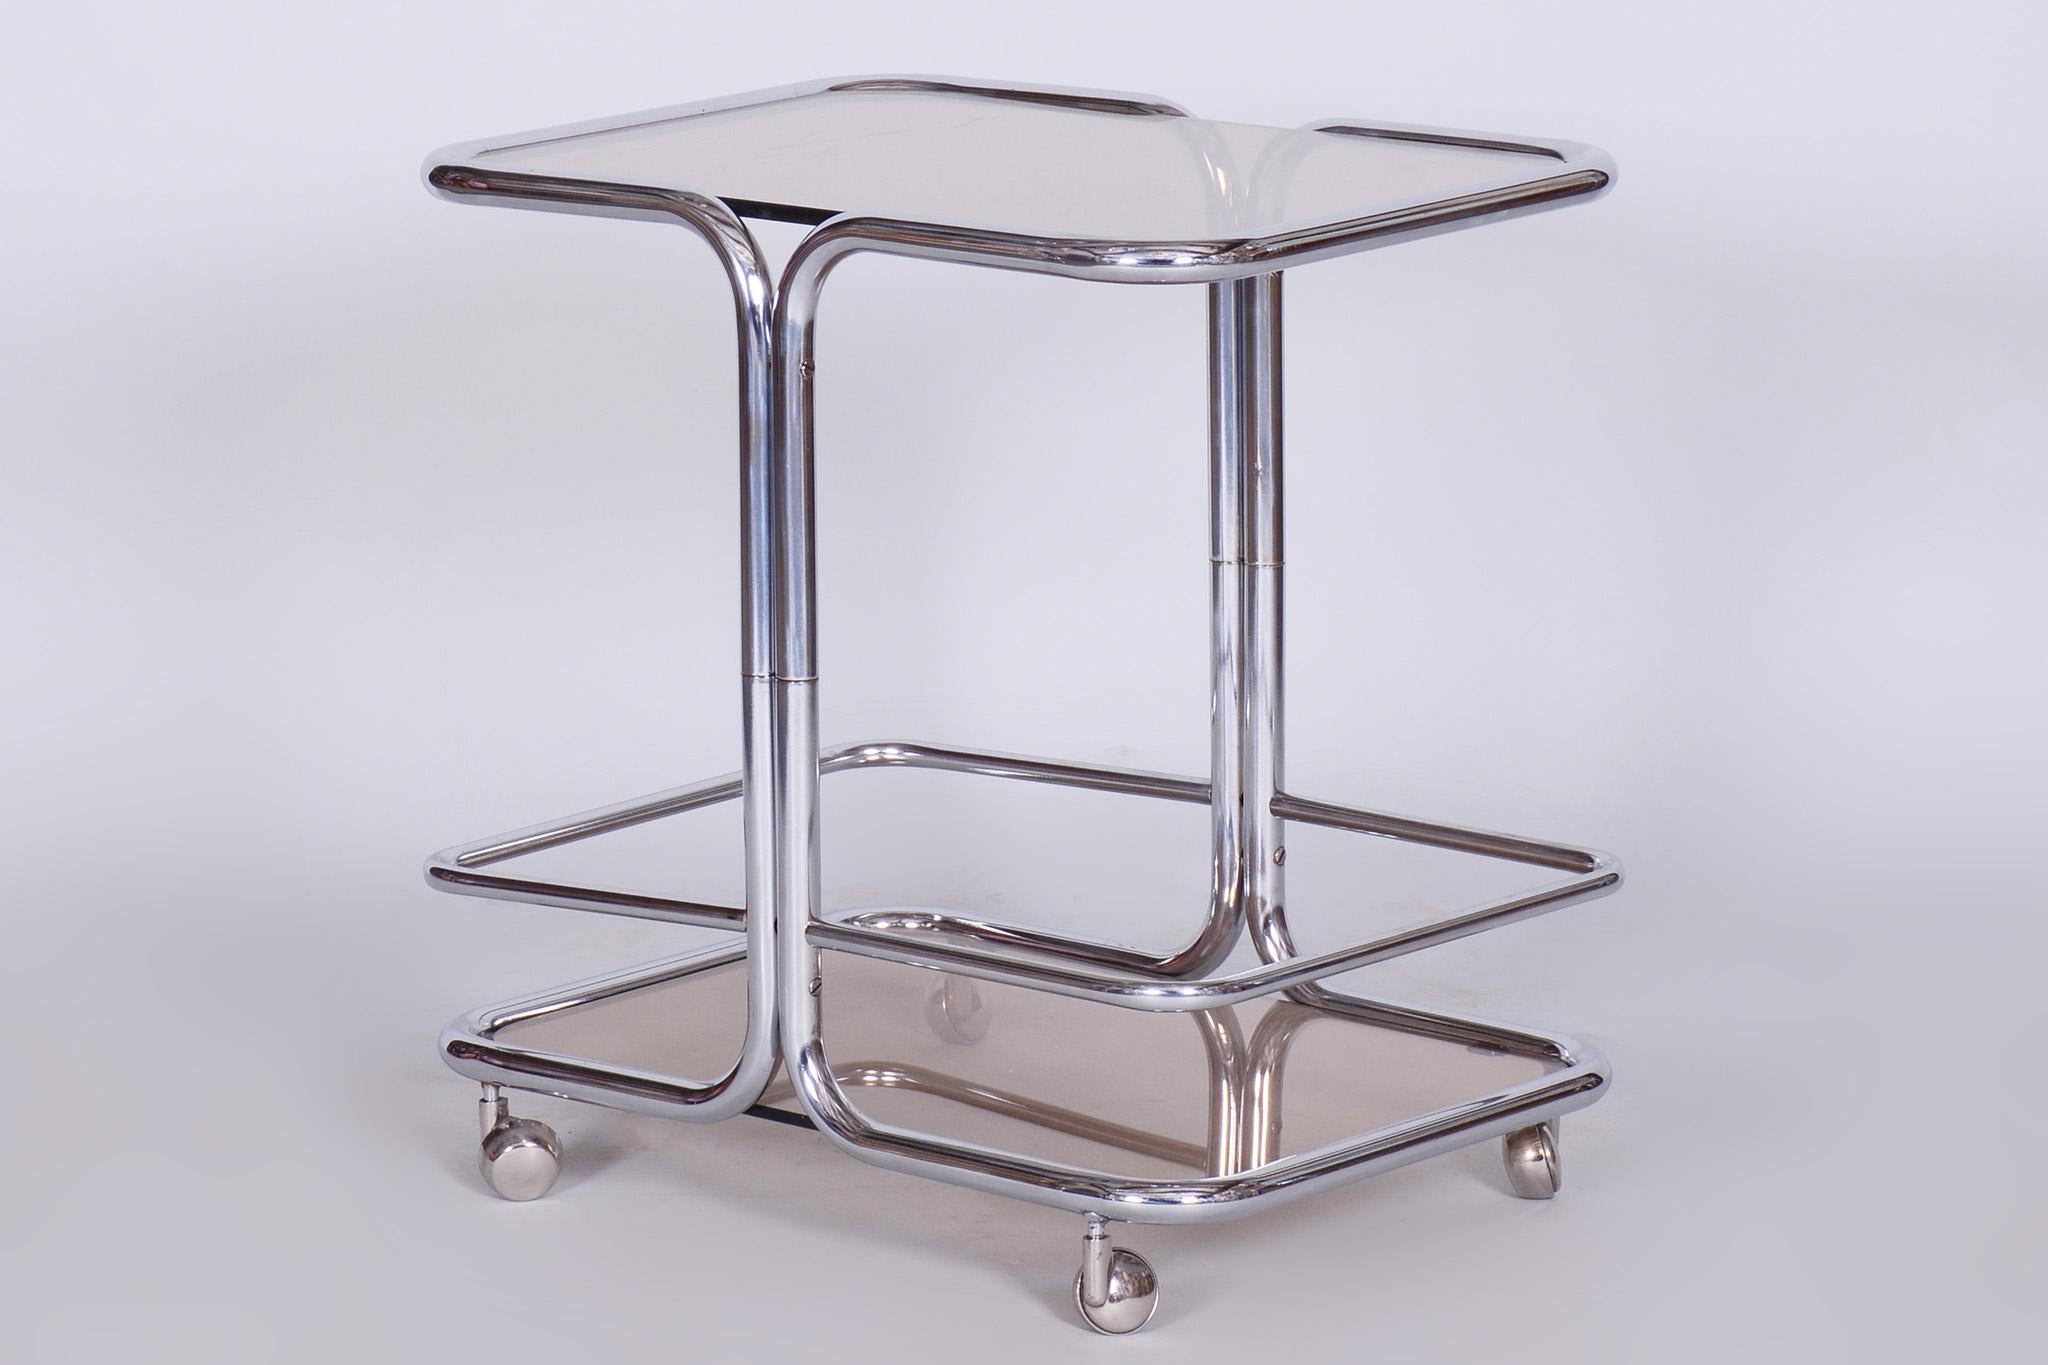 20th Century Original Midcentury Chrome Serving Trolley, Smoked Glass, 1960s, Czechia For Sale